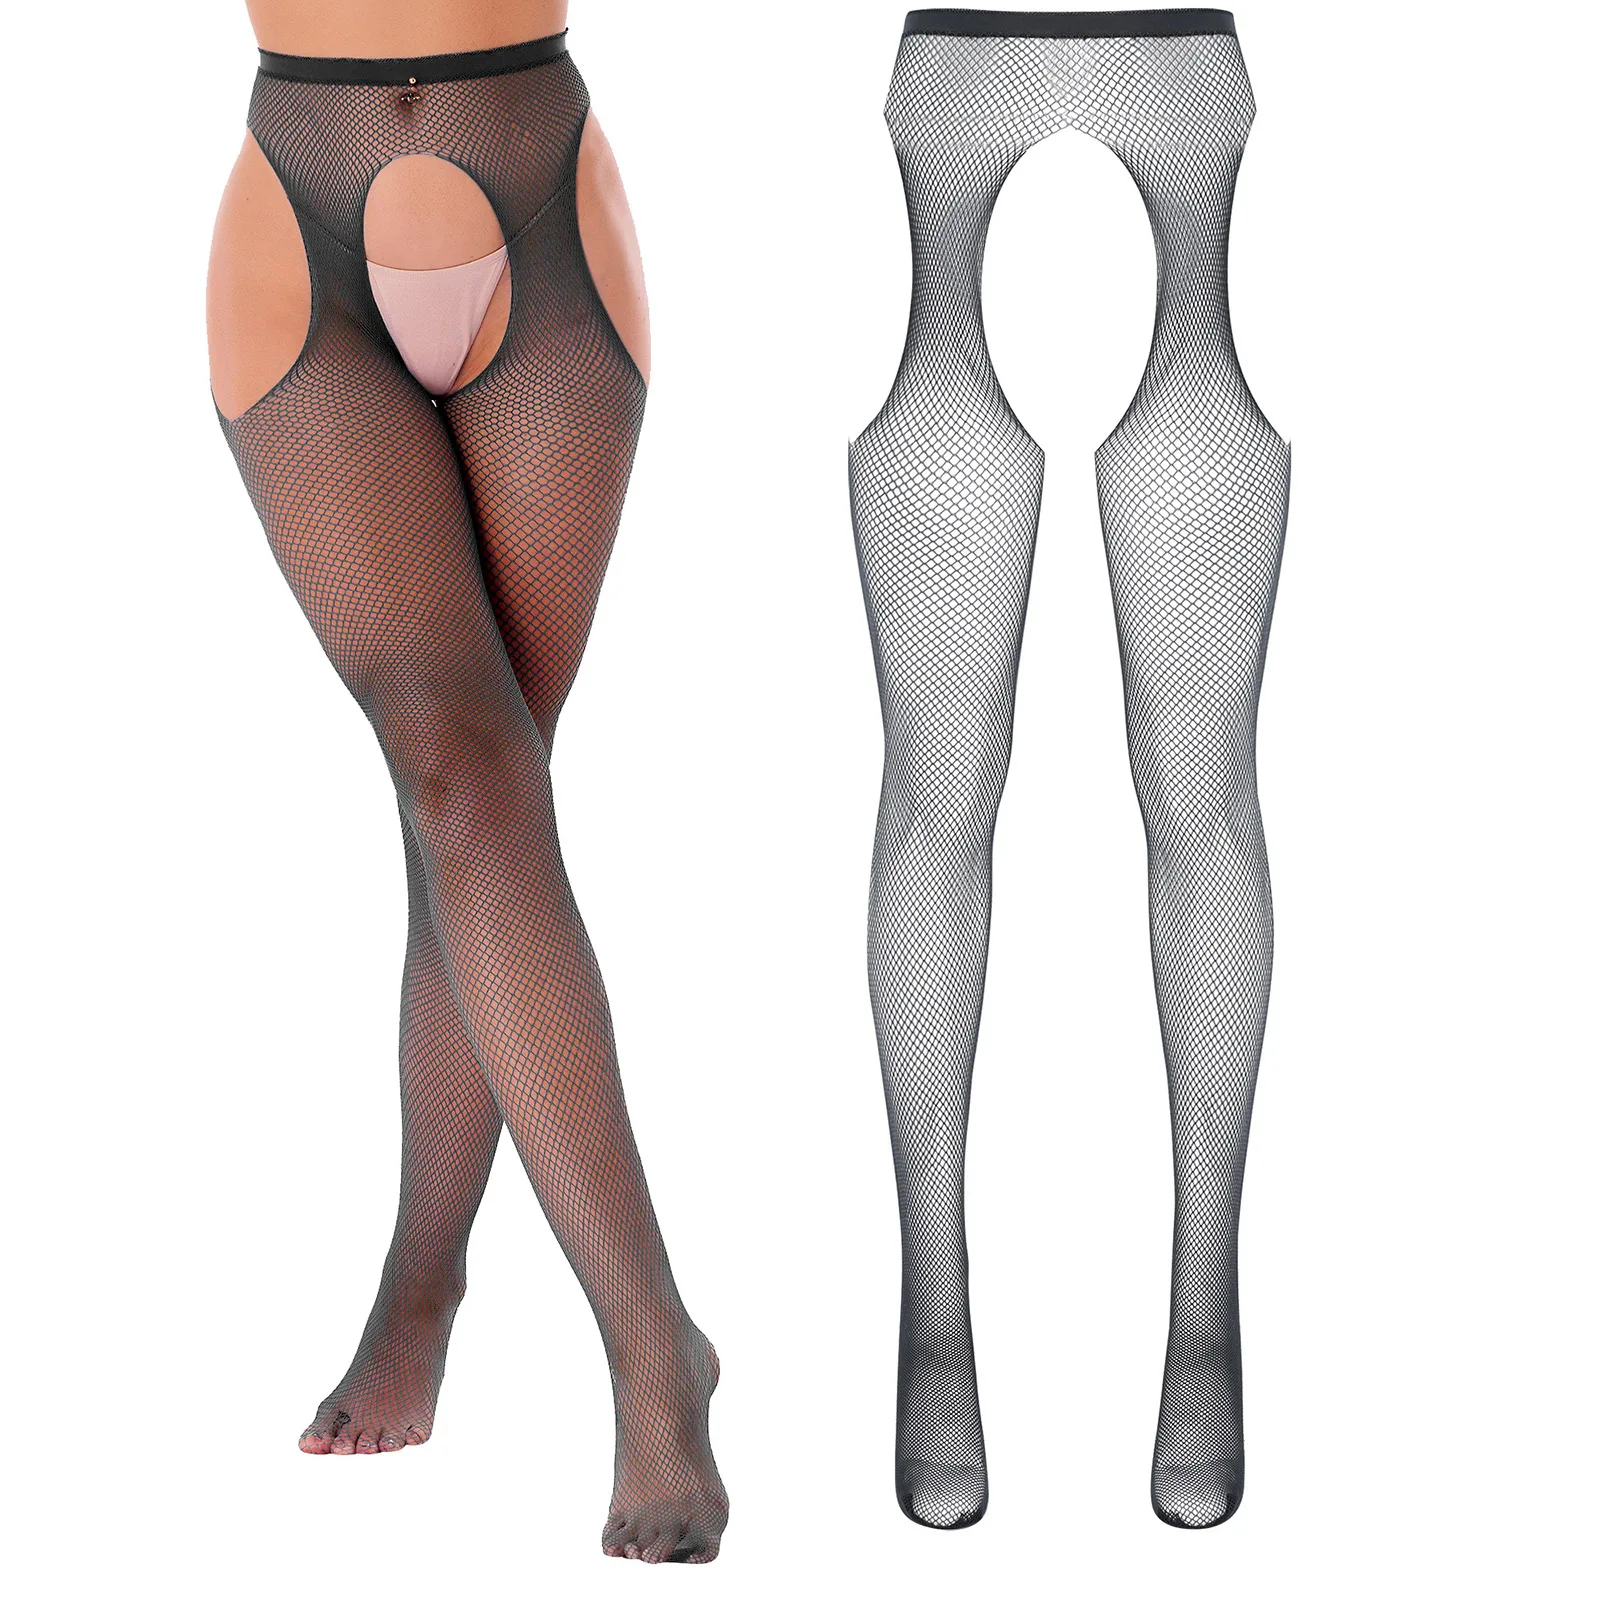 Womens Sexy Open Crotch Pantyhose Stockings Hollow Out Mid Waist Elastic Cutout Crotchless Leggings Underwear Erotic Lingerie women sexy erotic porno open crotch hollow stockings thigh high belt over knee long stocking sex lingerie tights pantyhose